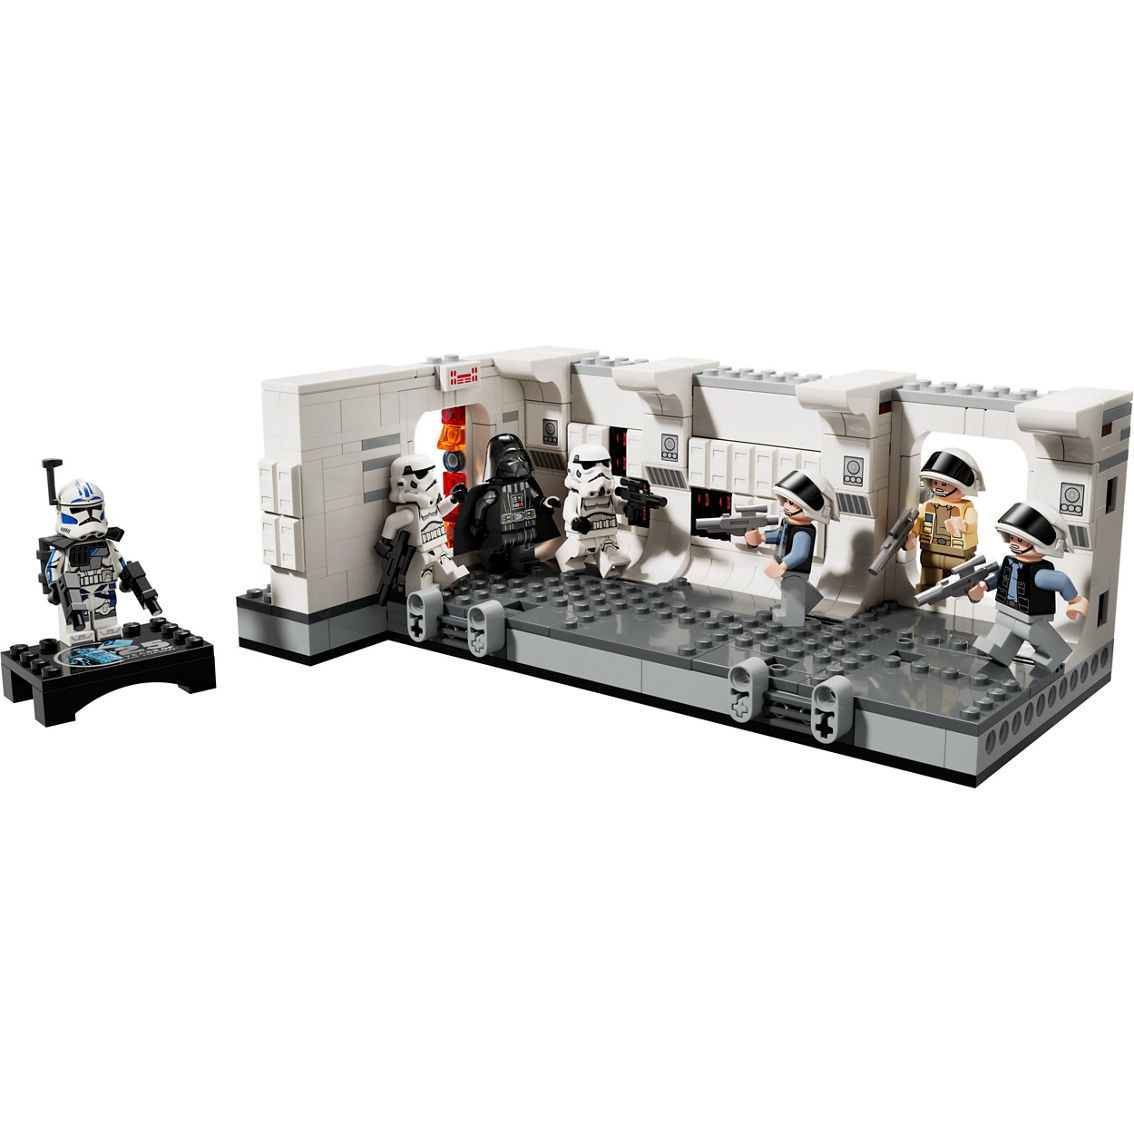 LEGO Star Wars Boarding the Tantive IV Playset 75387 - Image 4 of 10